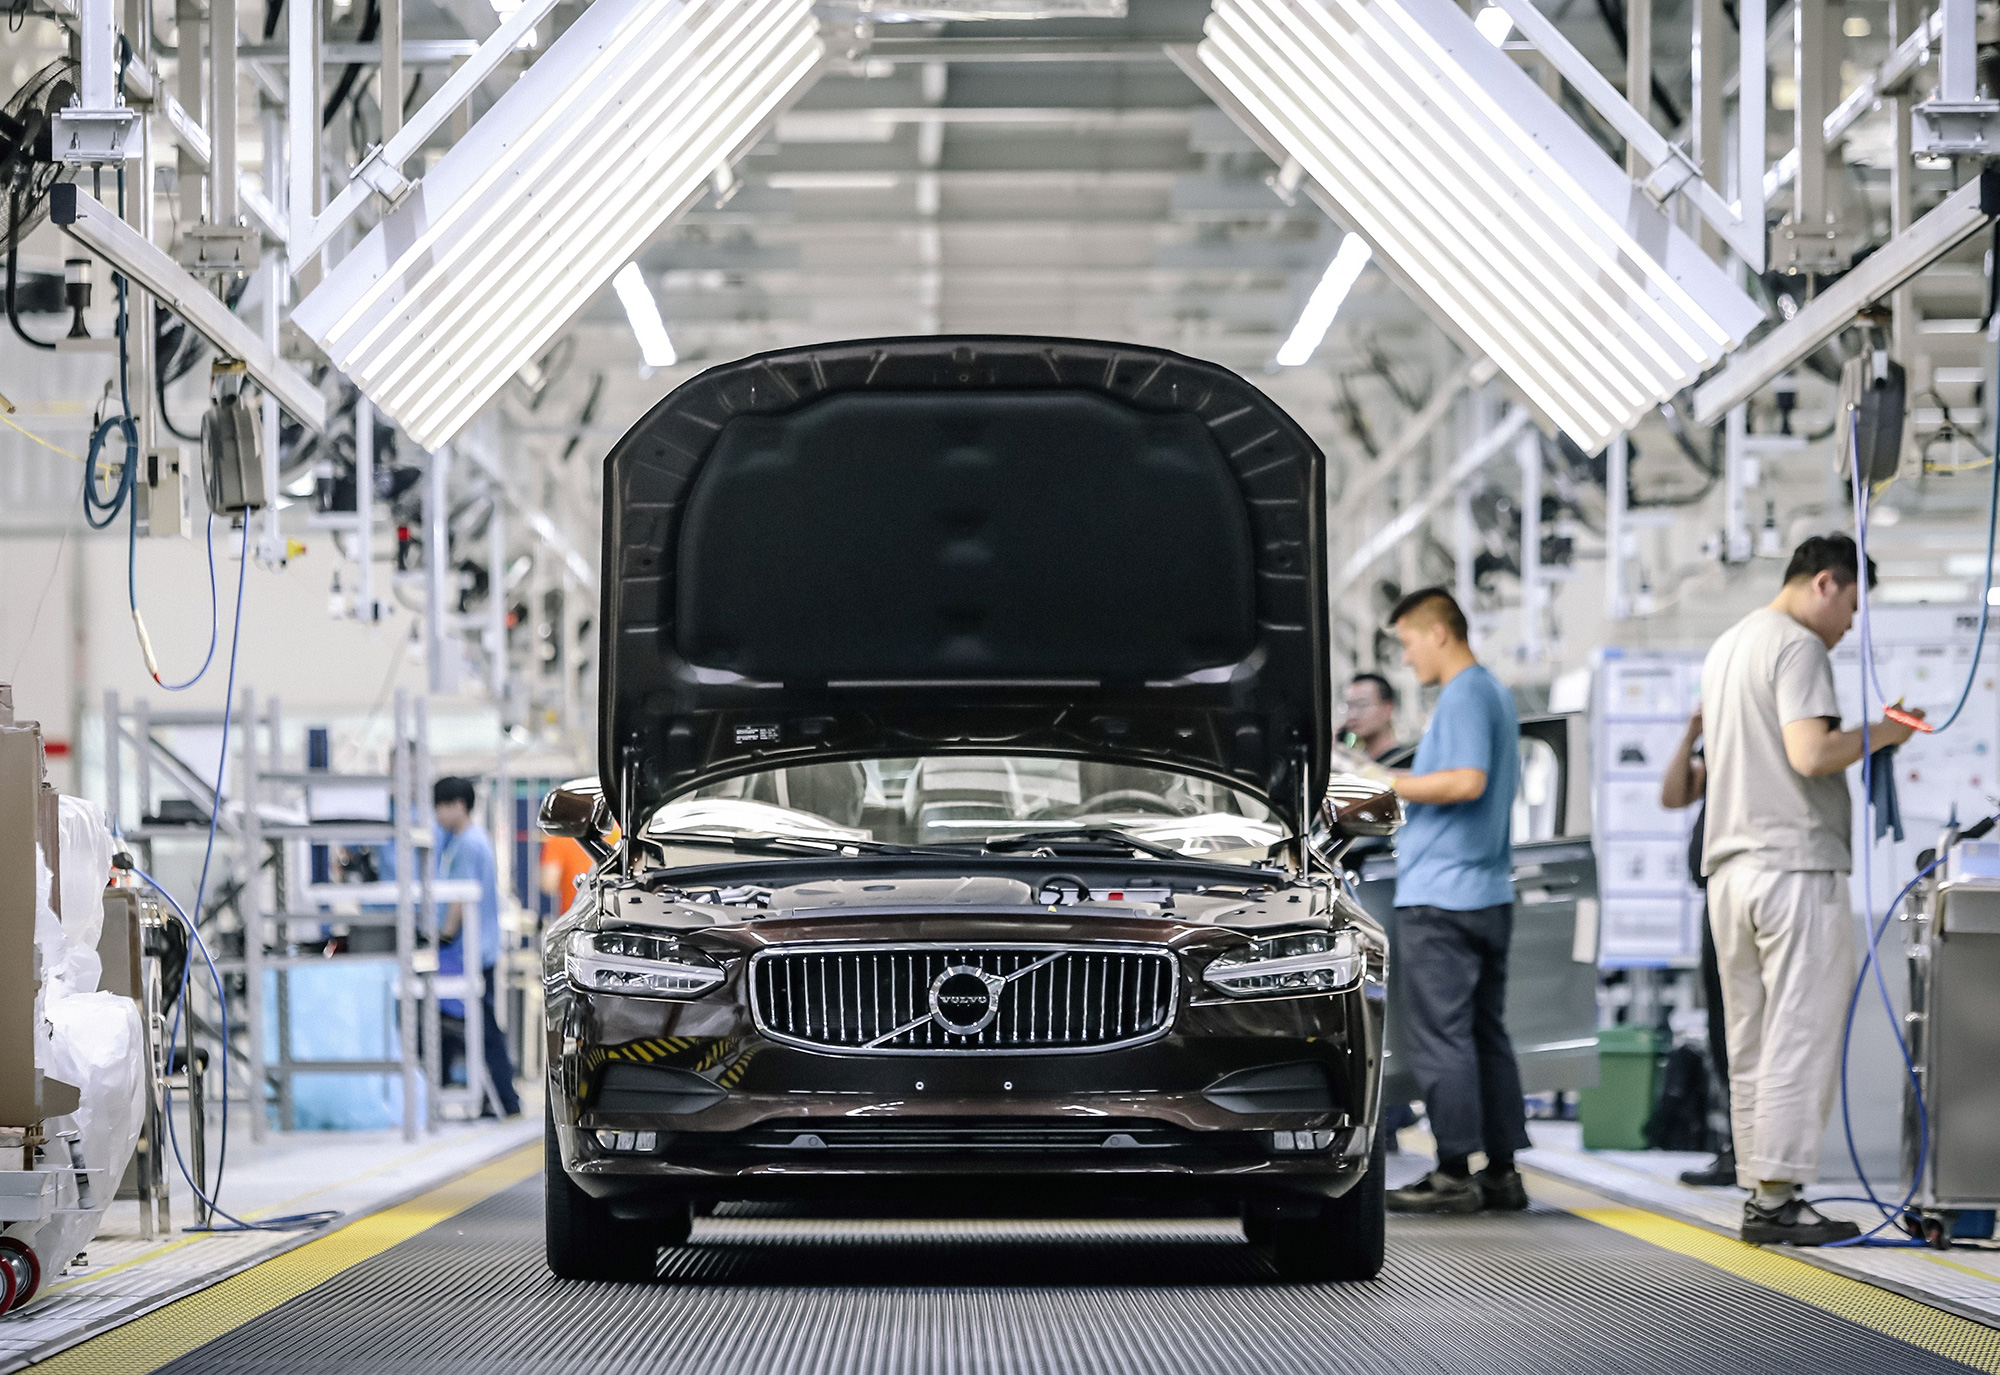 208617_The_Volvo_Cars_manufacturing_plant_in_Daqing_China.jpg